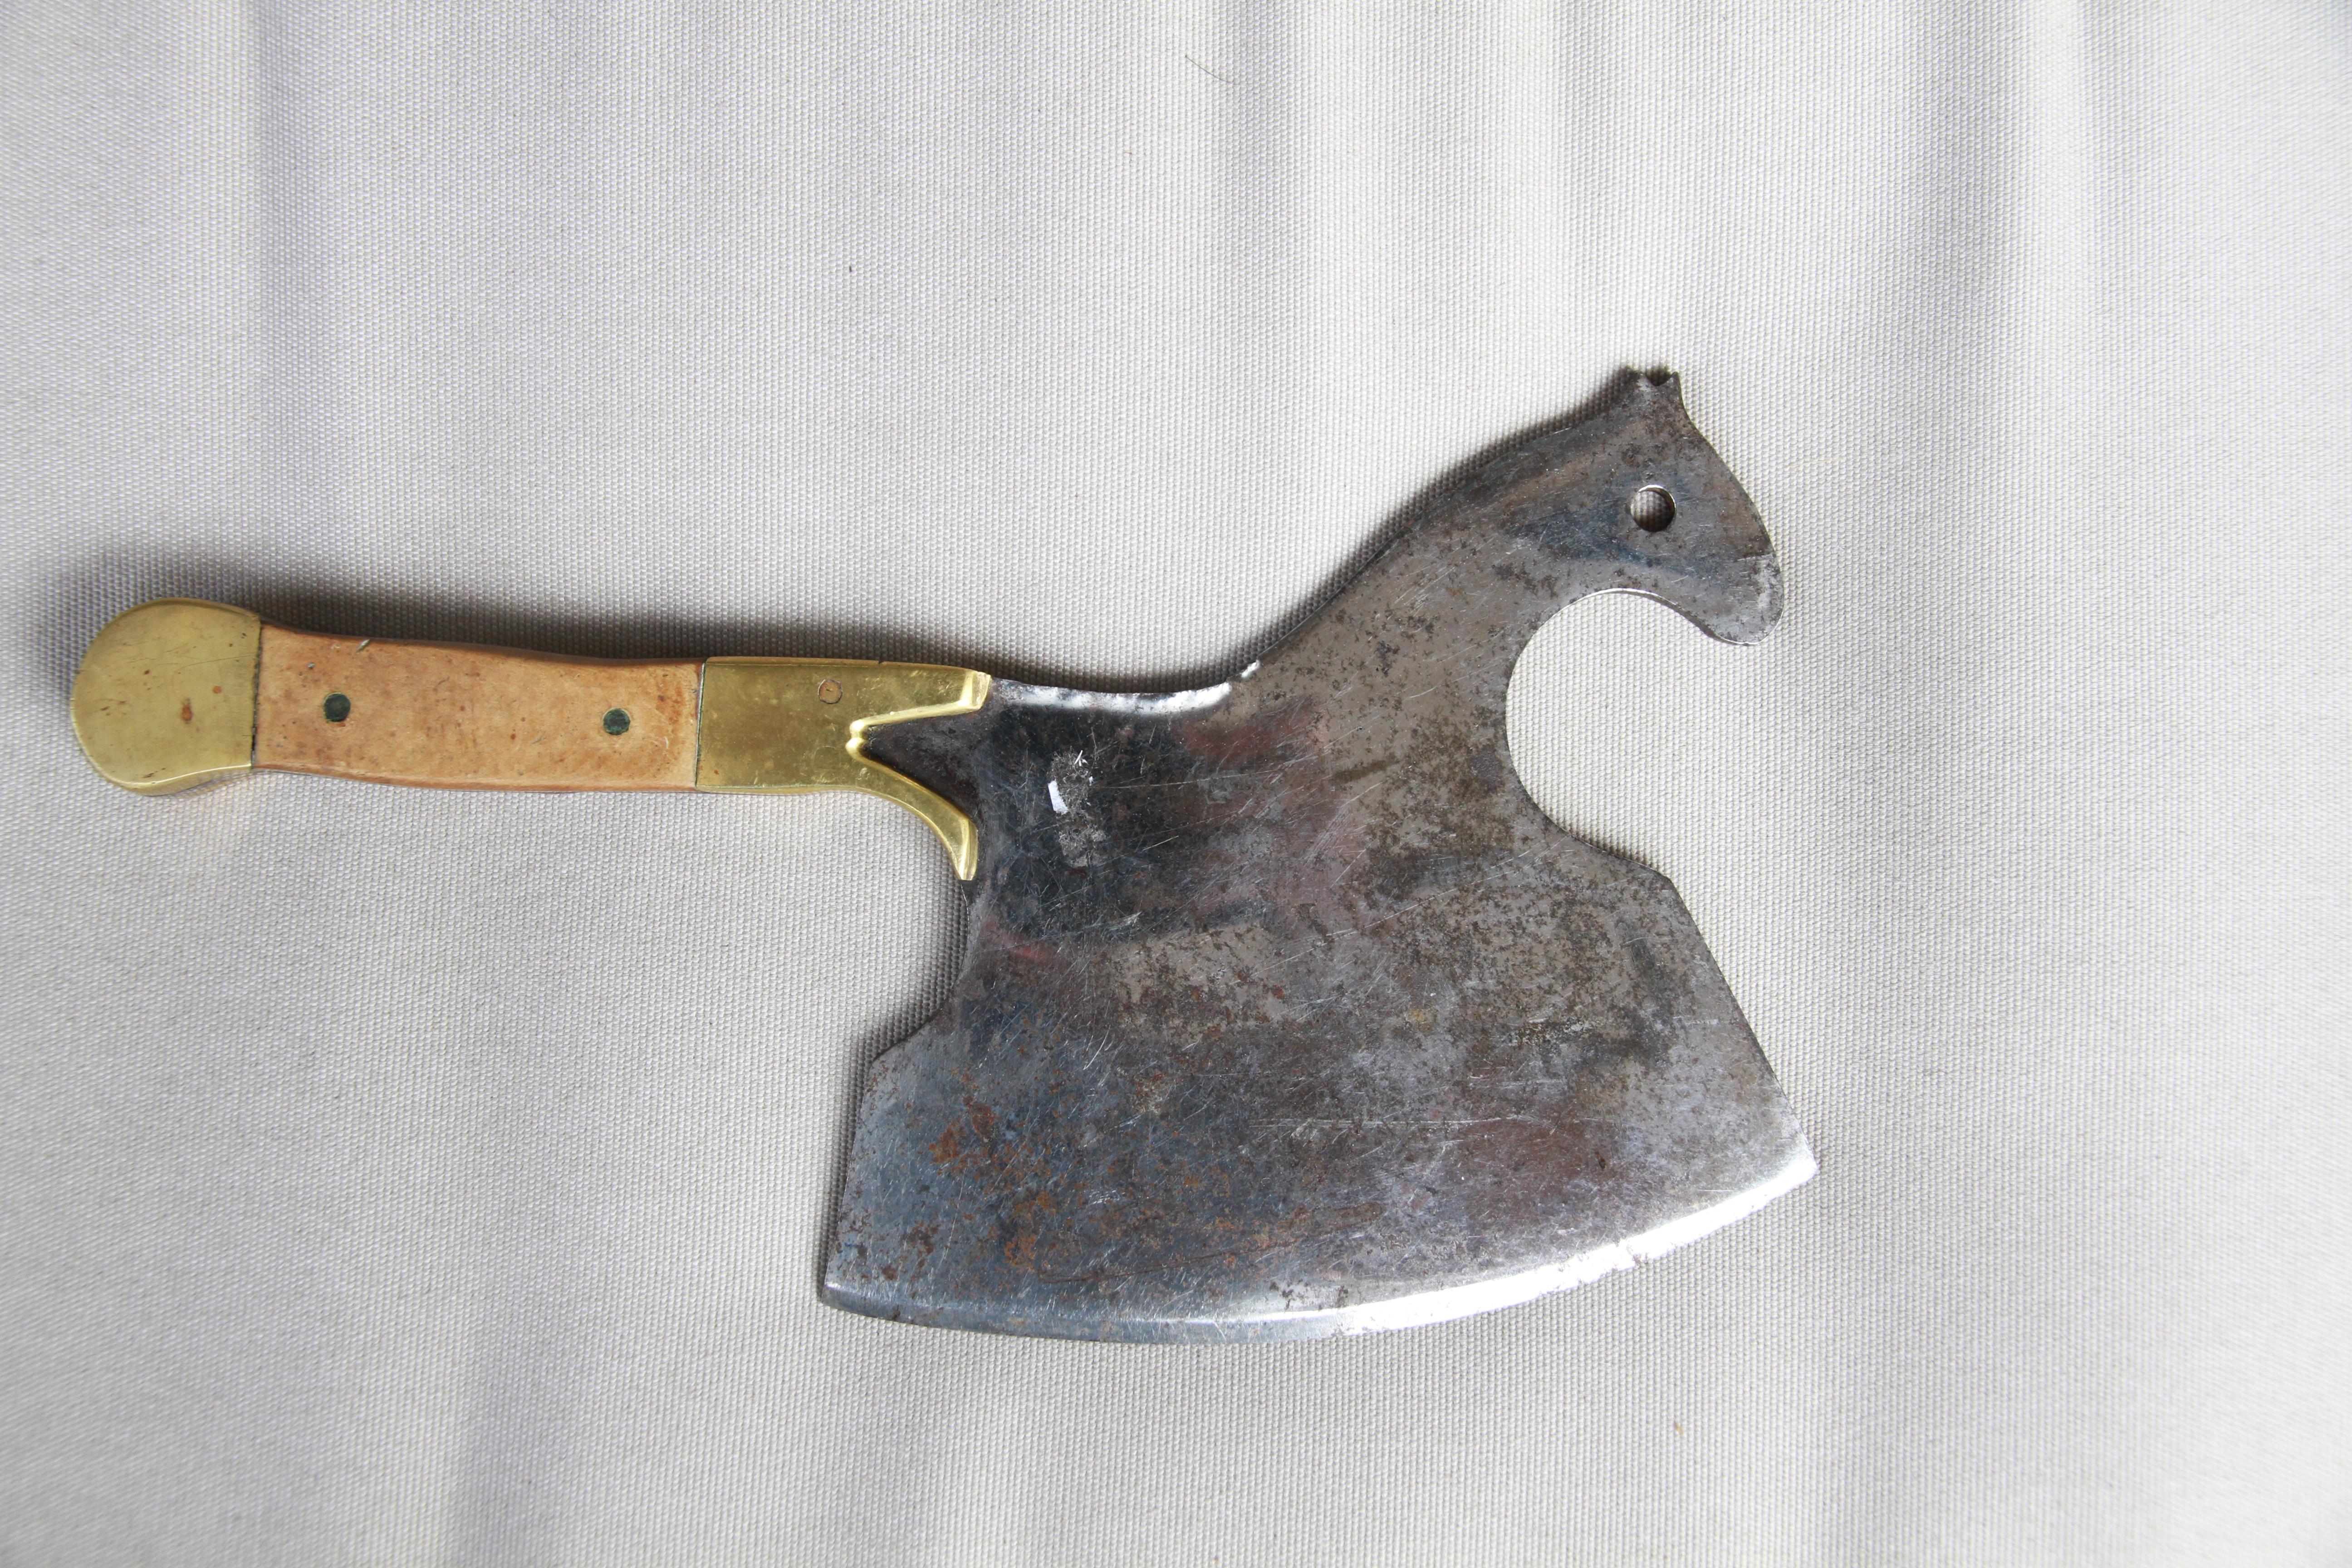 A delightful figurative butcher's cleaver from France in the shape of a horse. With a 7 inch blade, the handle is made of wood and brass.